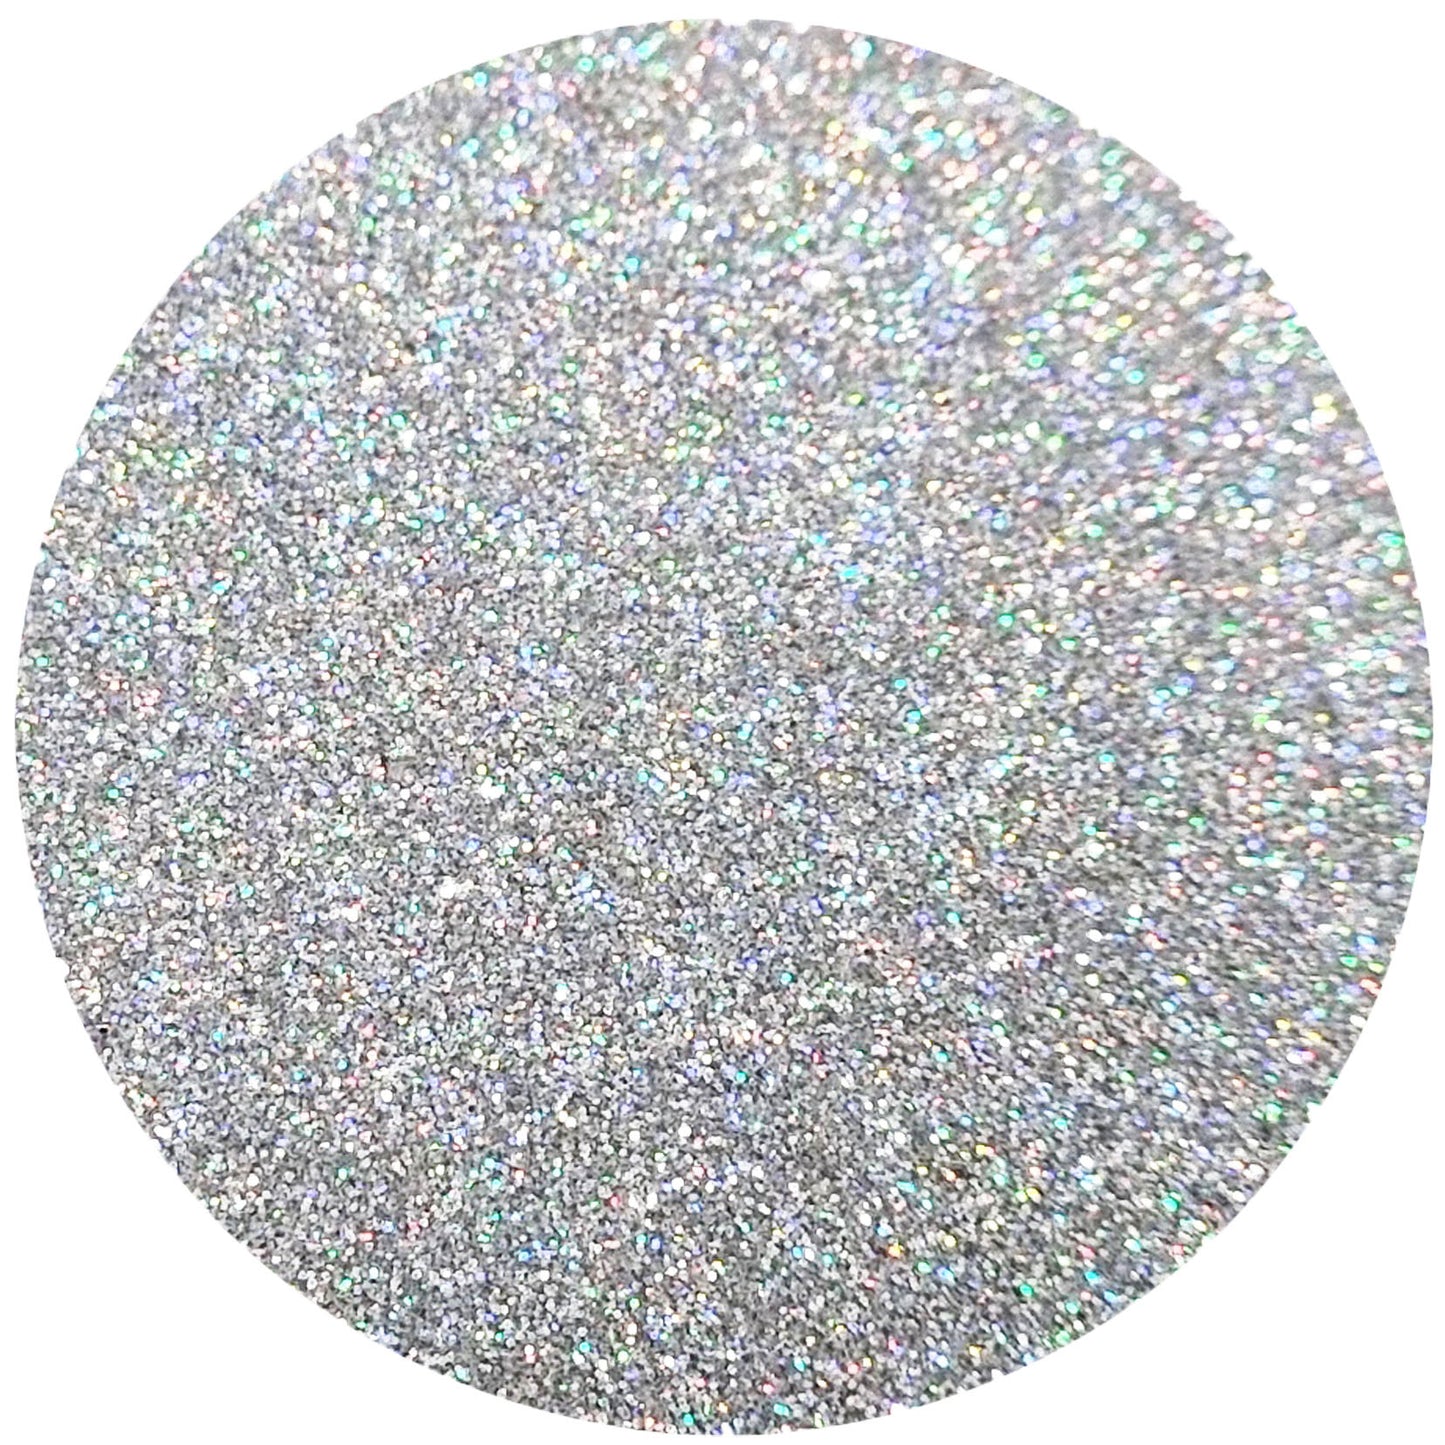 Silver Holographic Glitter | Fine | Candles, Wax Melt, Cosmetics, Bath Bombs, Shower Gel | Truly Personal Ltd